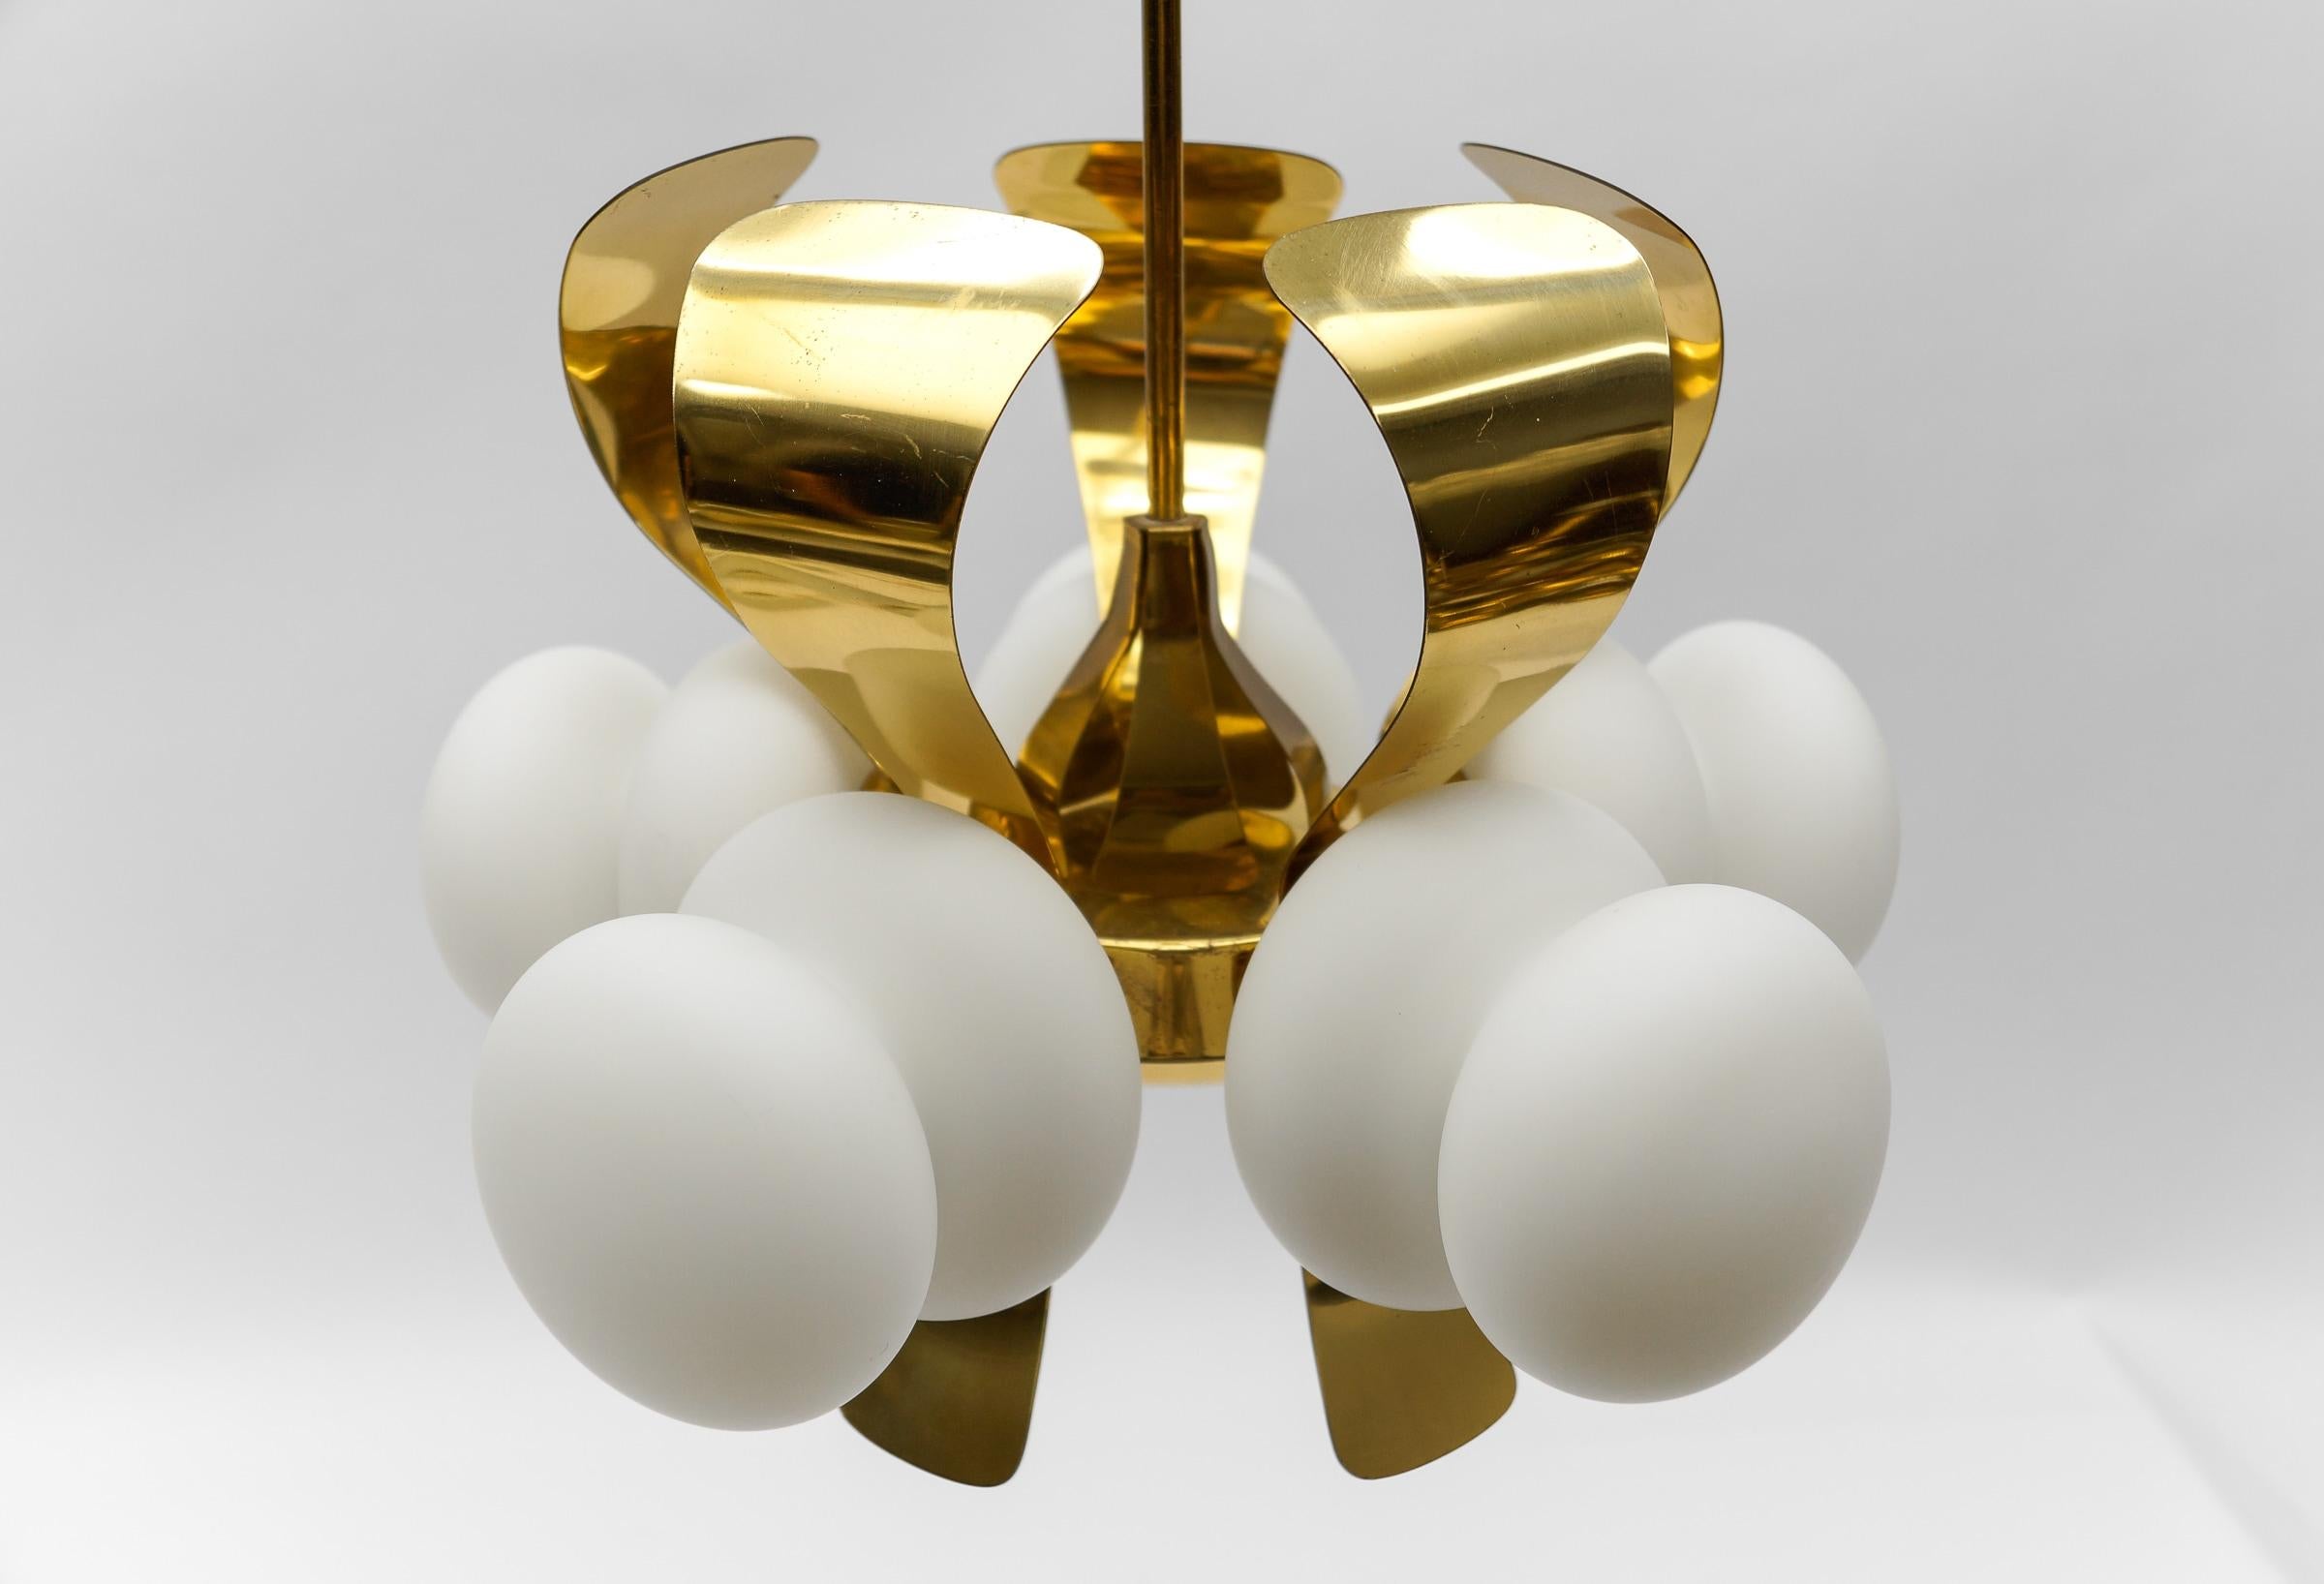 Metal Very Rare Mid-Century Modern 5-Arm Orbit Lamp in Gold and Opaline Glass, 1960s For Sale